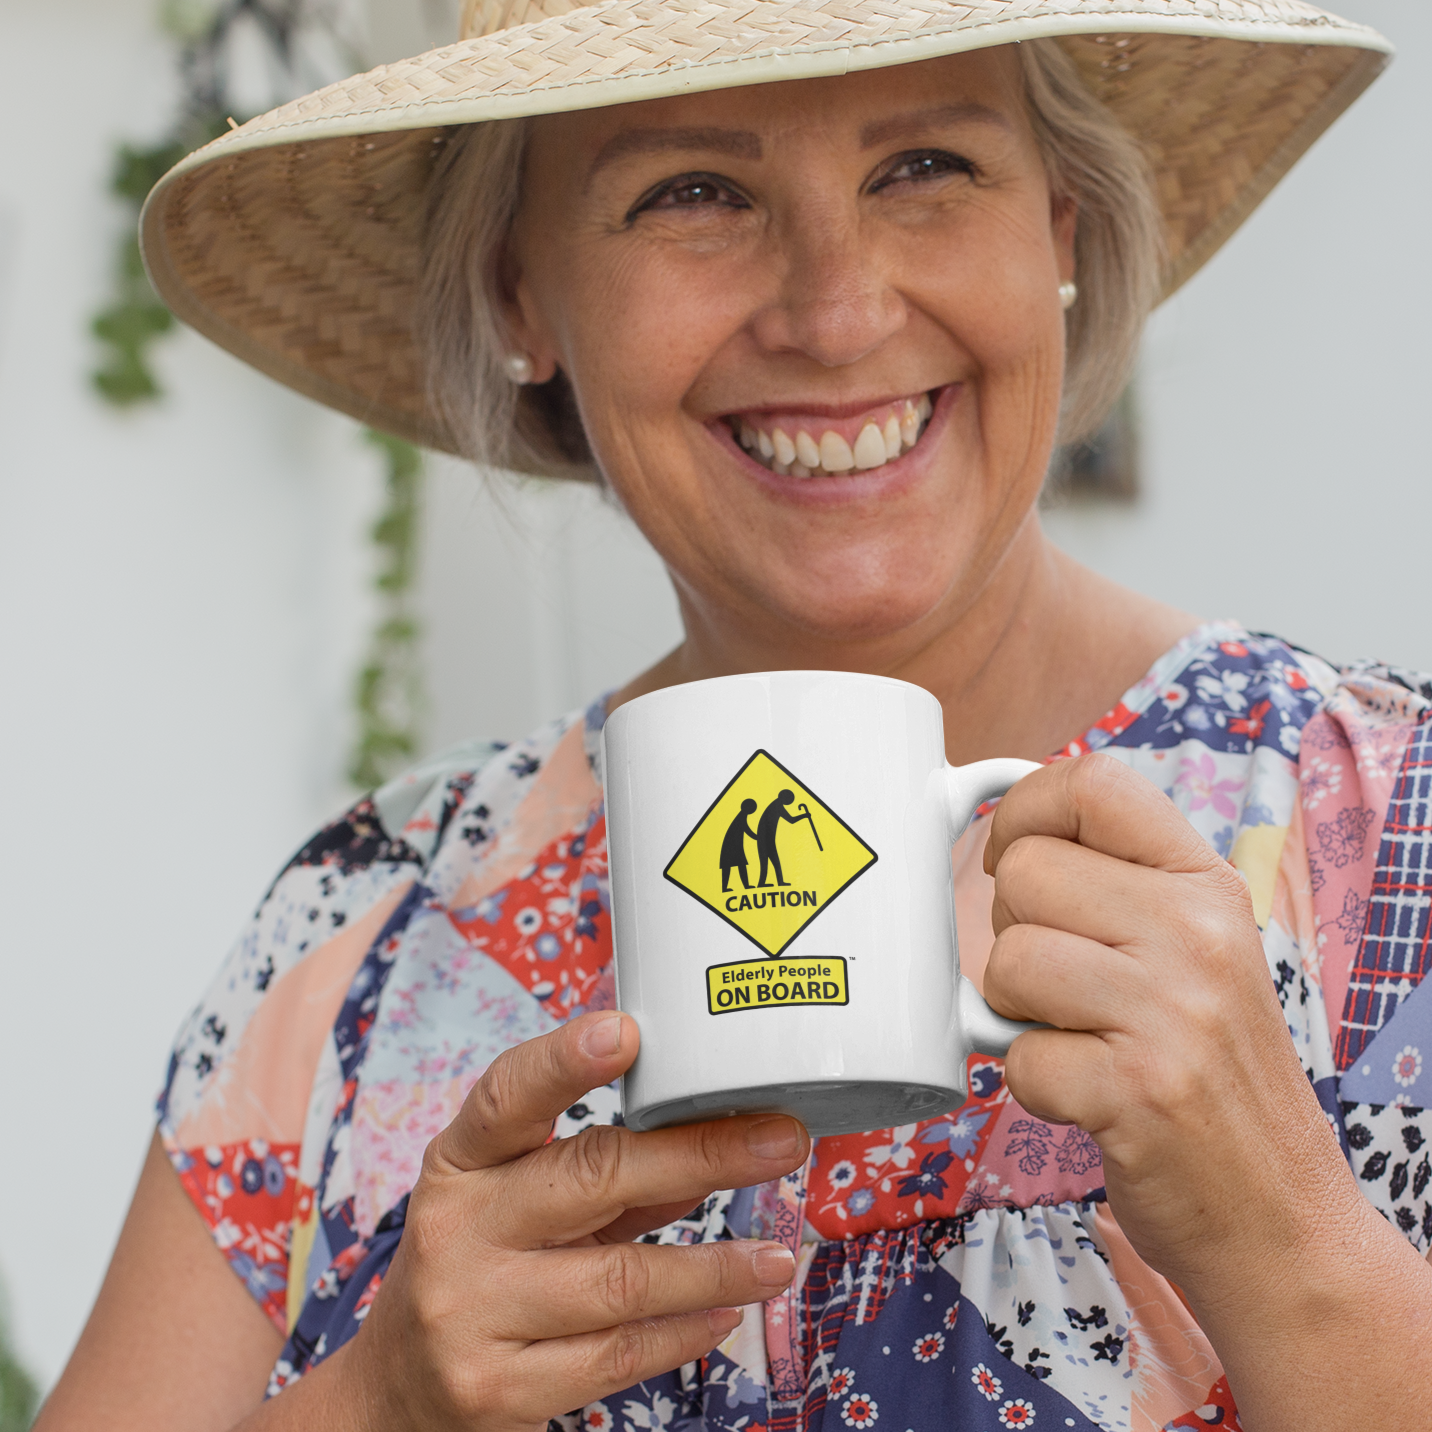 Mature woman holding a coffee mug that says "Caution: Elderly People ON BOARD"